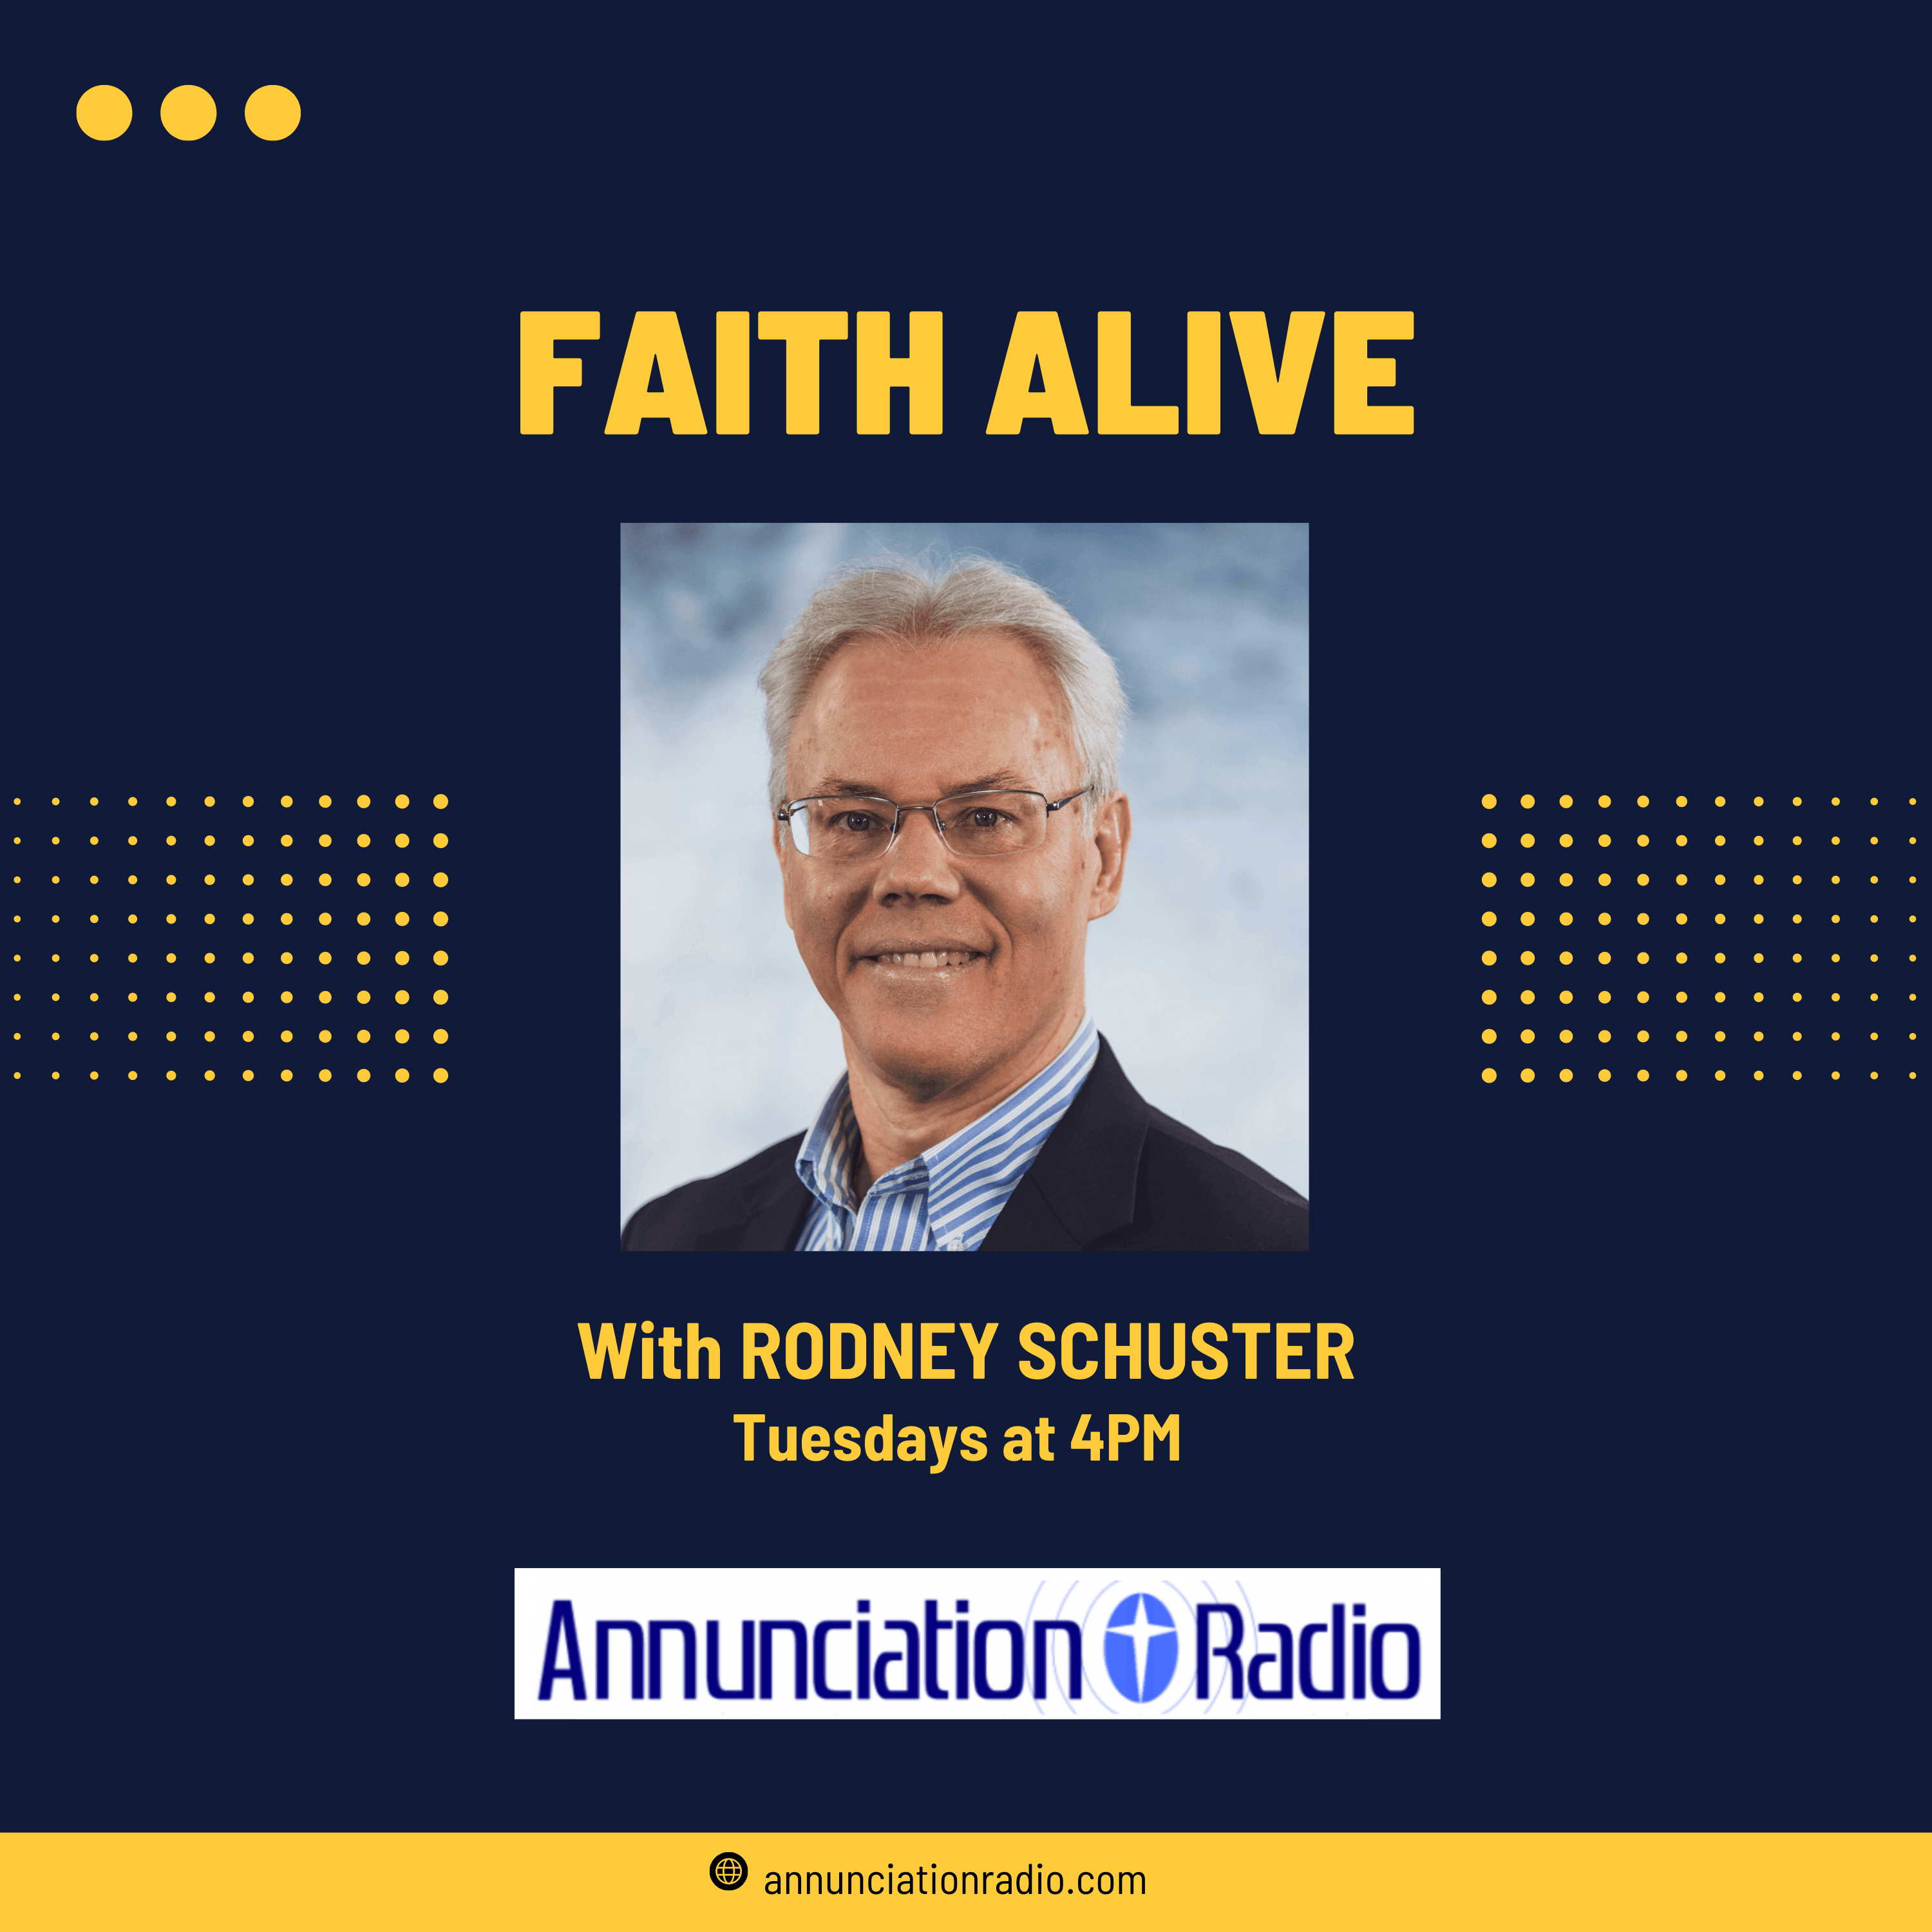 Catholic Charities Diocese of Toledo’s hour-long program airs weekly on Tuesdays at 4 p.m. and at 3 p.m. on Saturdays. Listen to live and archived "Faith Alive" programs on Annunciation Radio's mobile app or on their website https://www.annunciationradio.